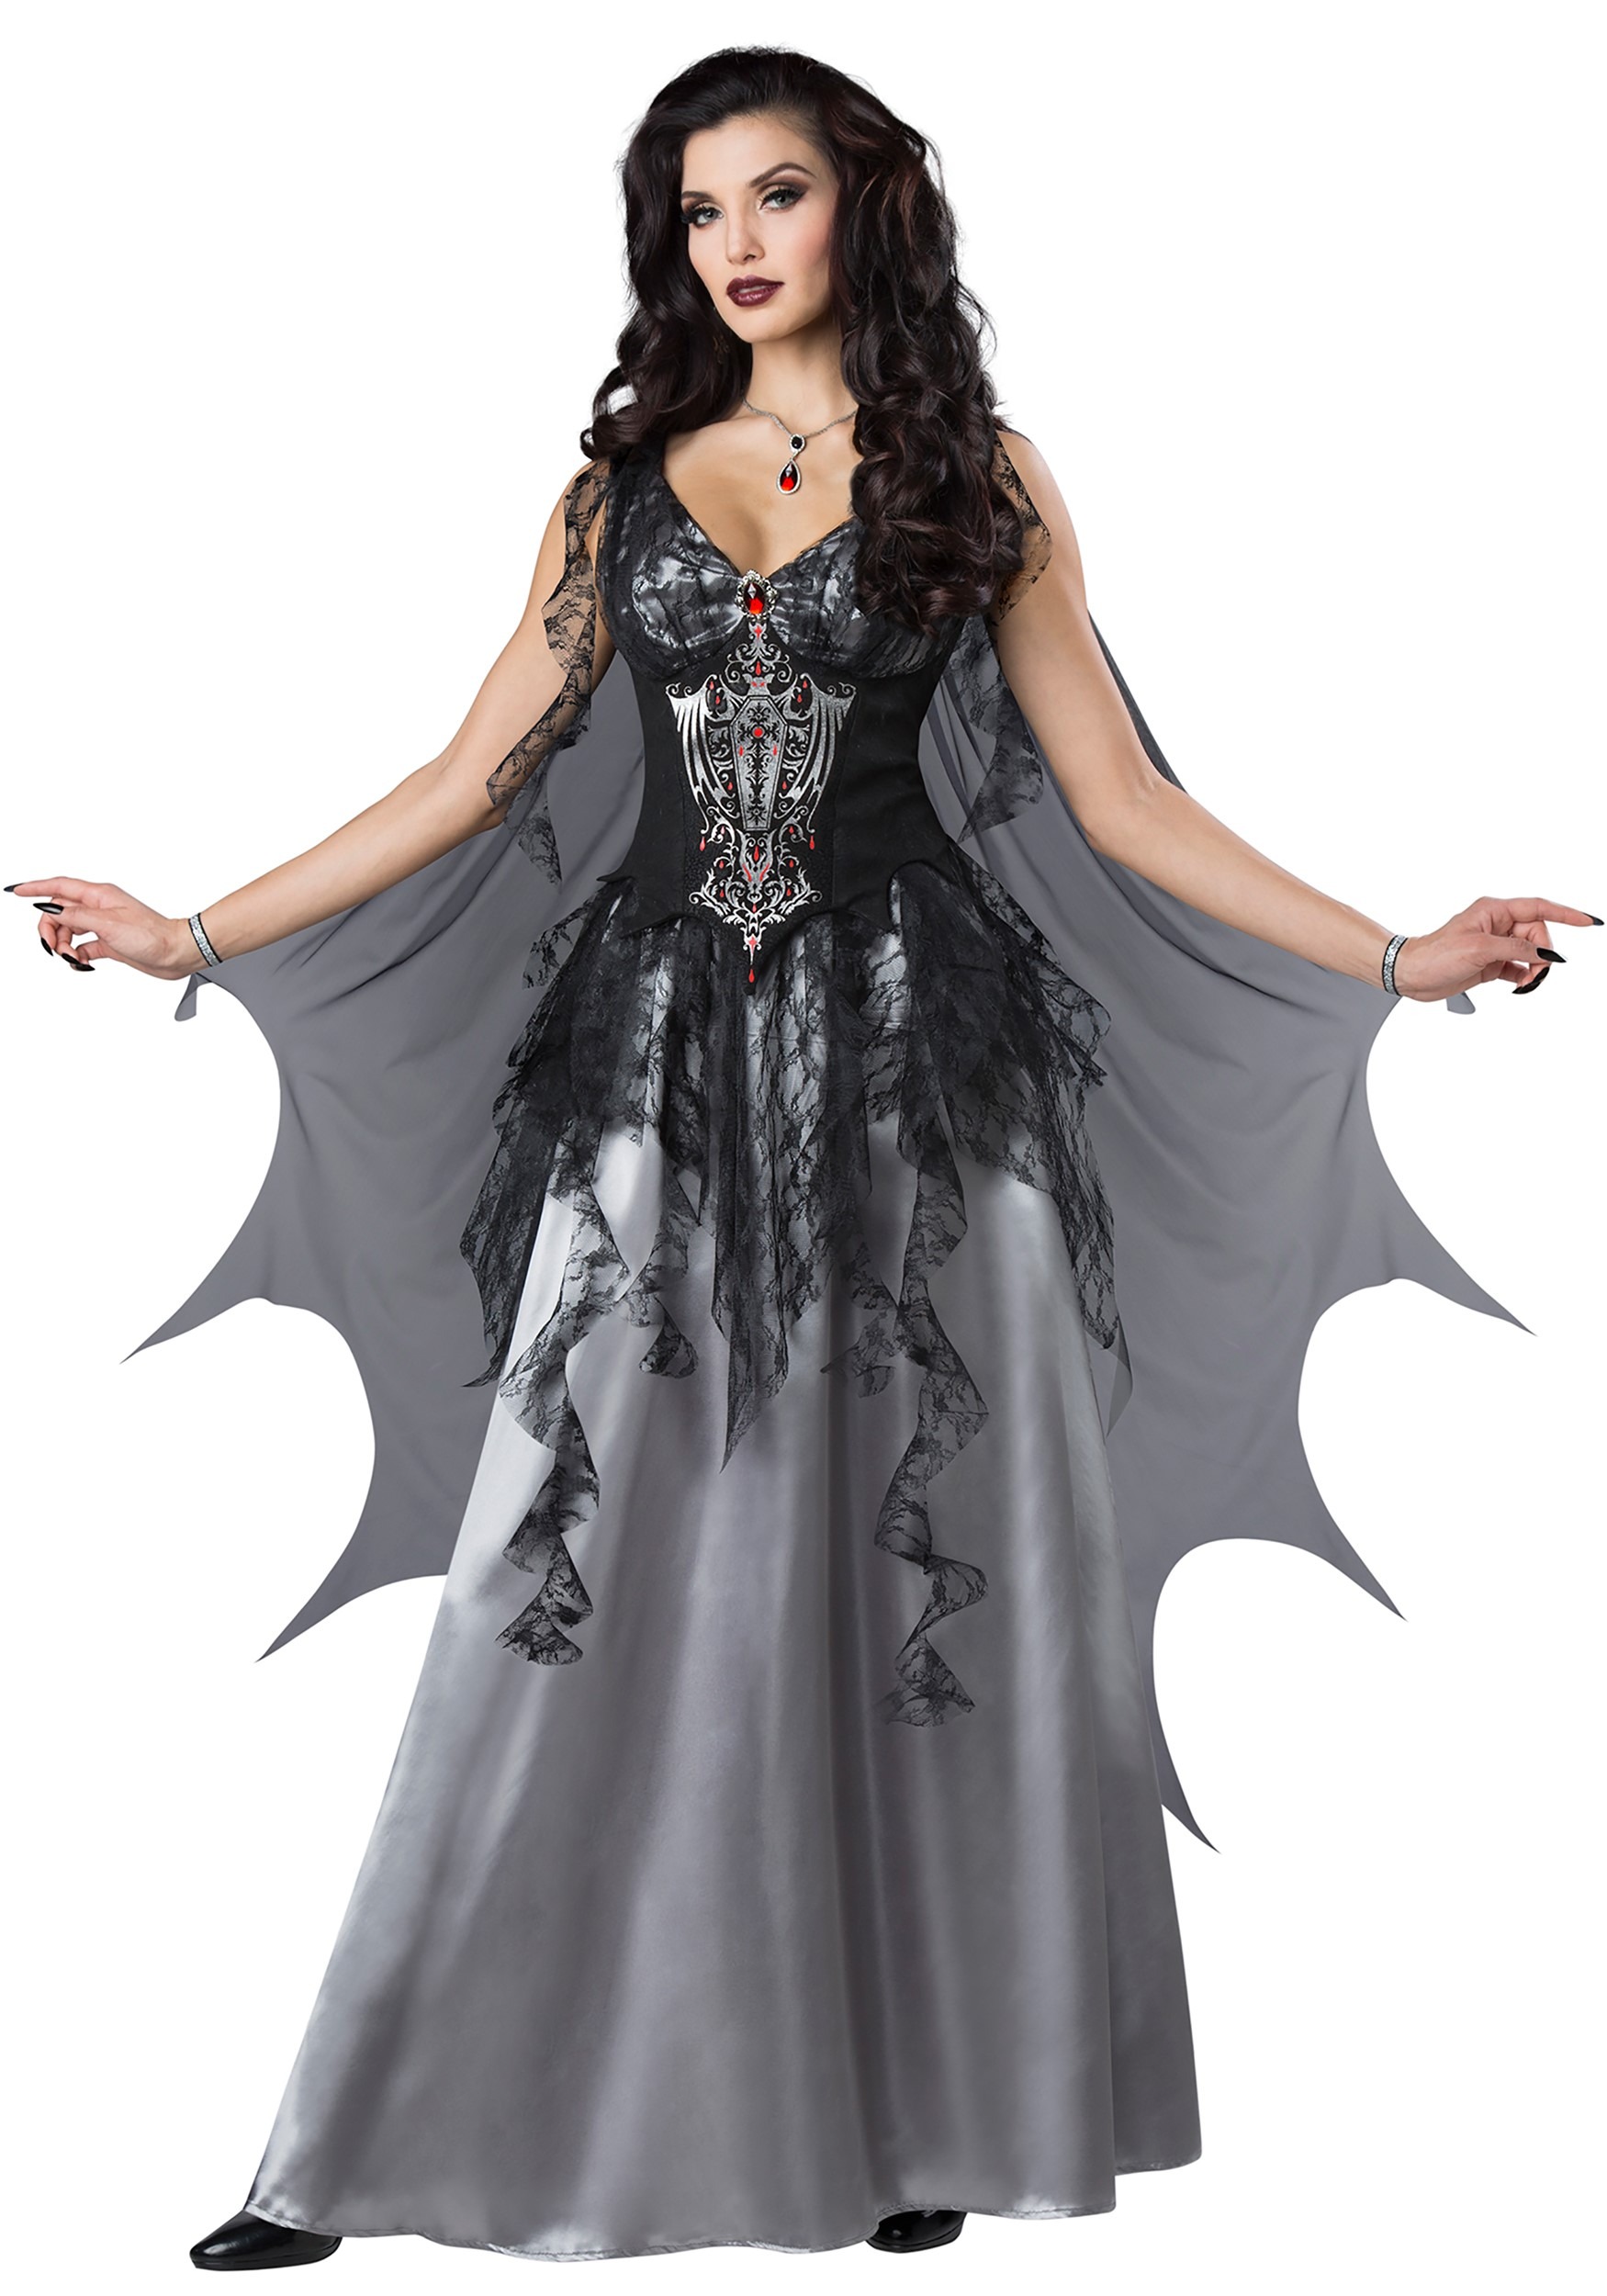 The Best Womens Vampire Costumes And Accessories Deluxe Theatrical Quality Adult Costumes